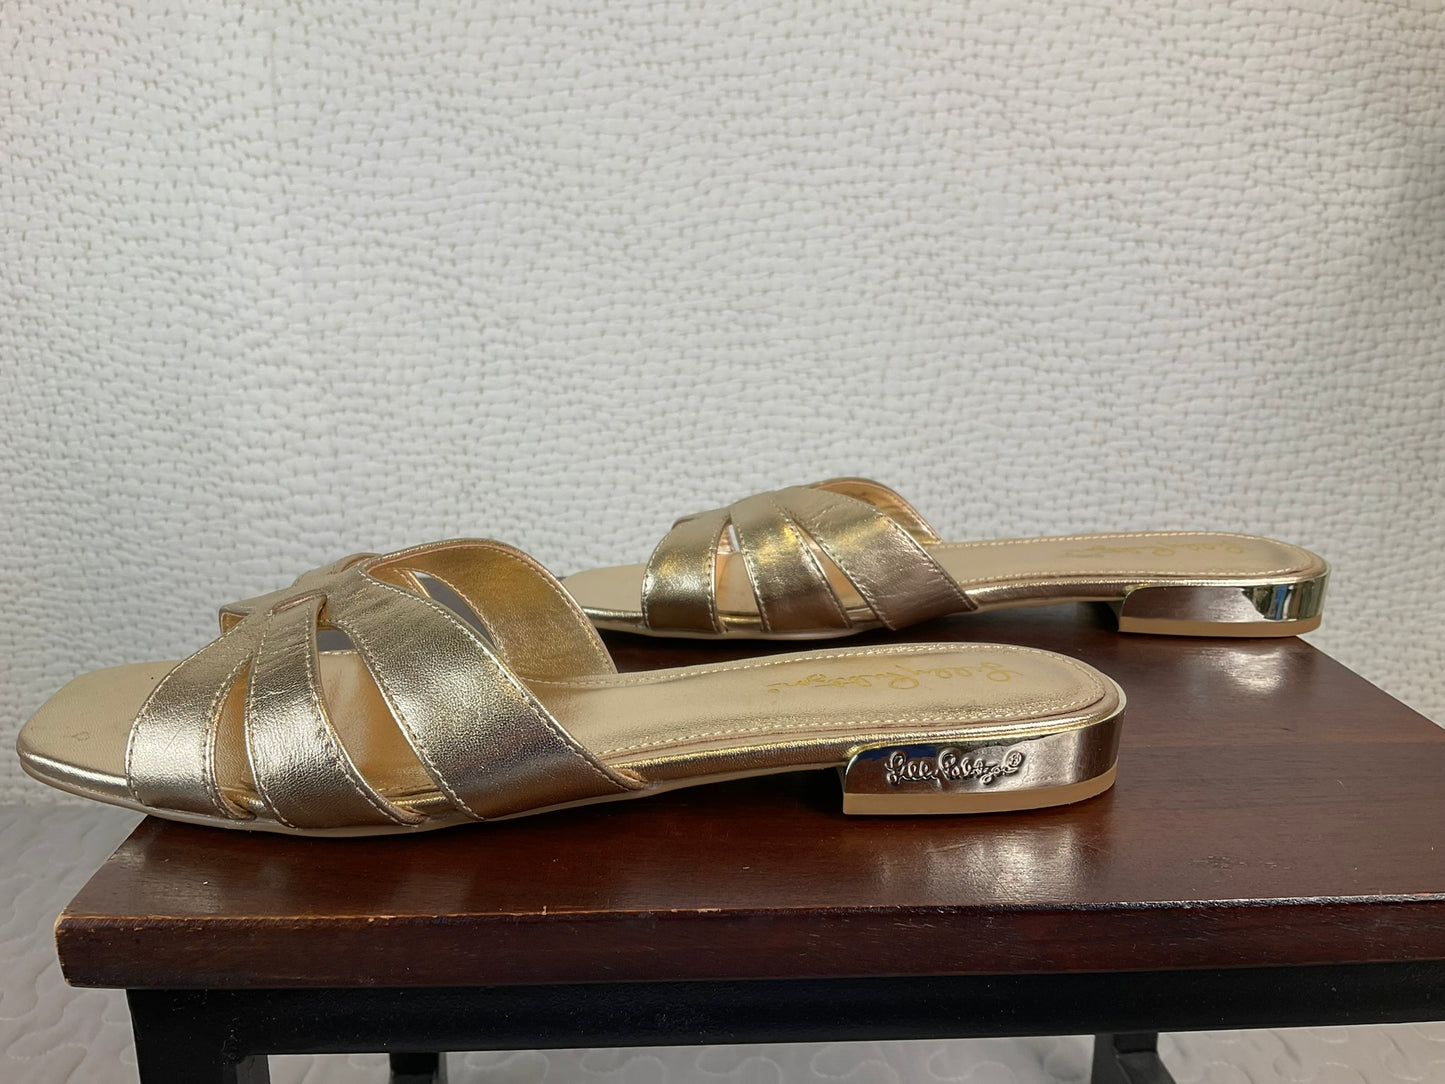 Lily Pulitzer Whitley Slide Sandals, Size 8 M